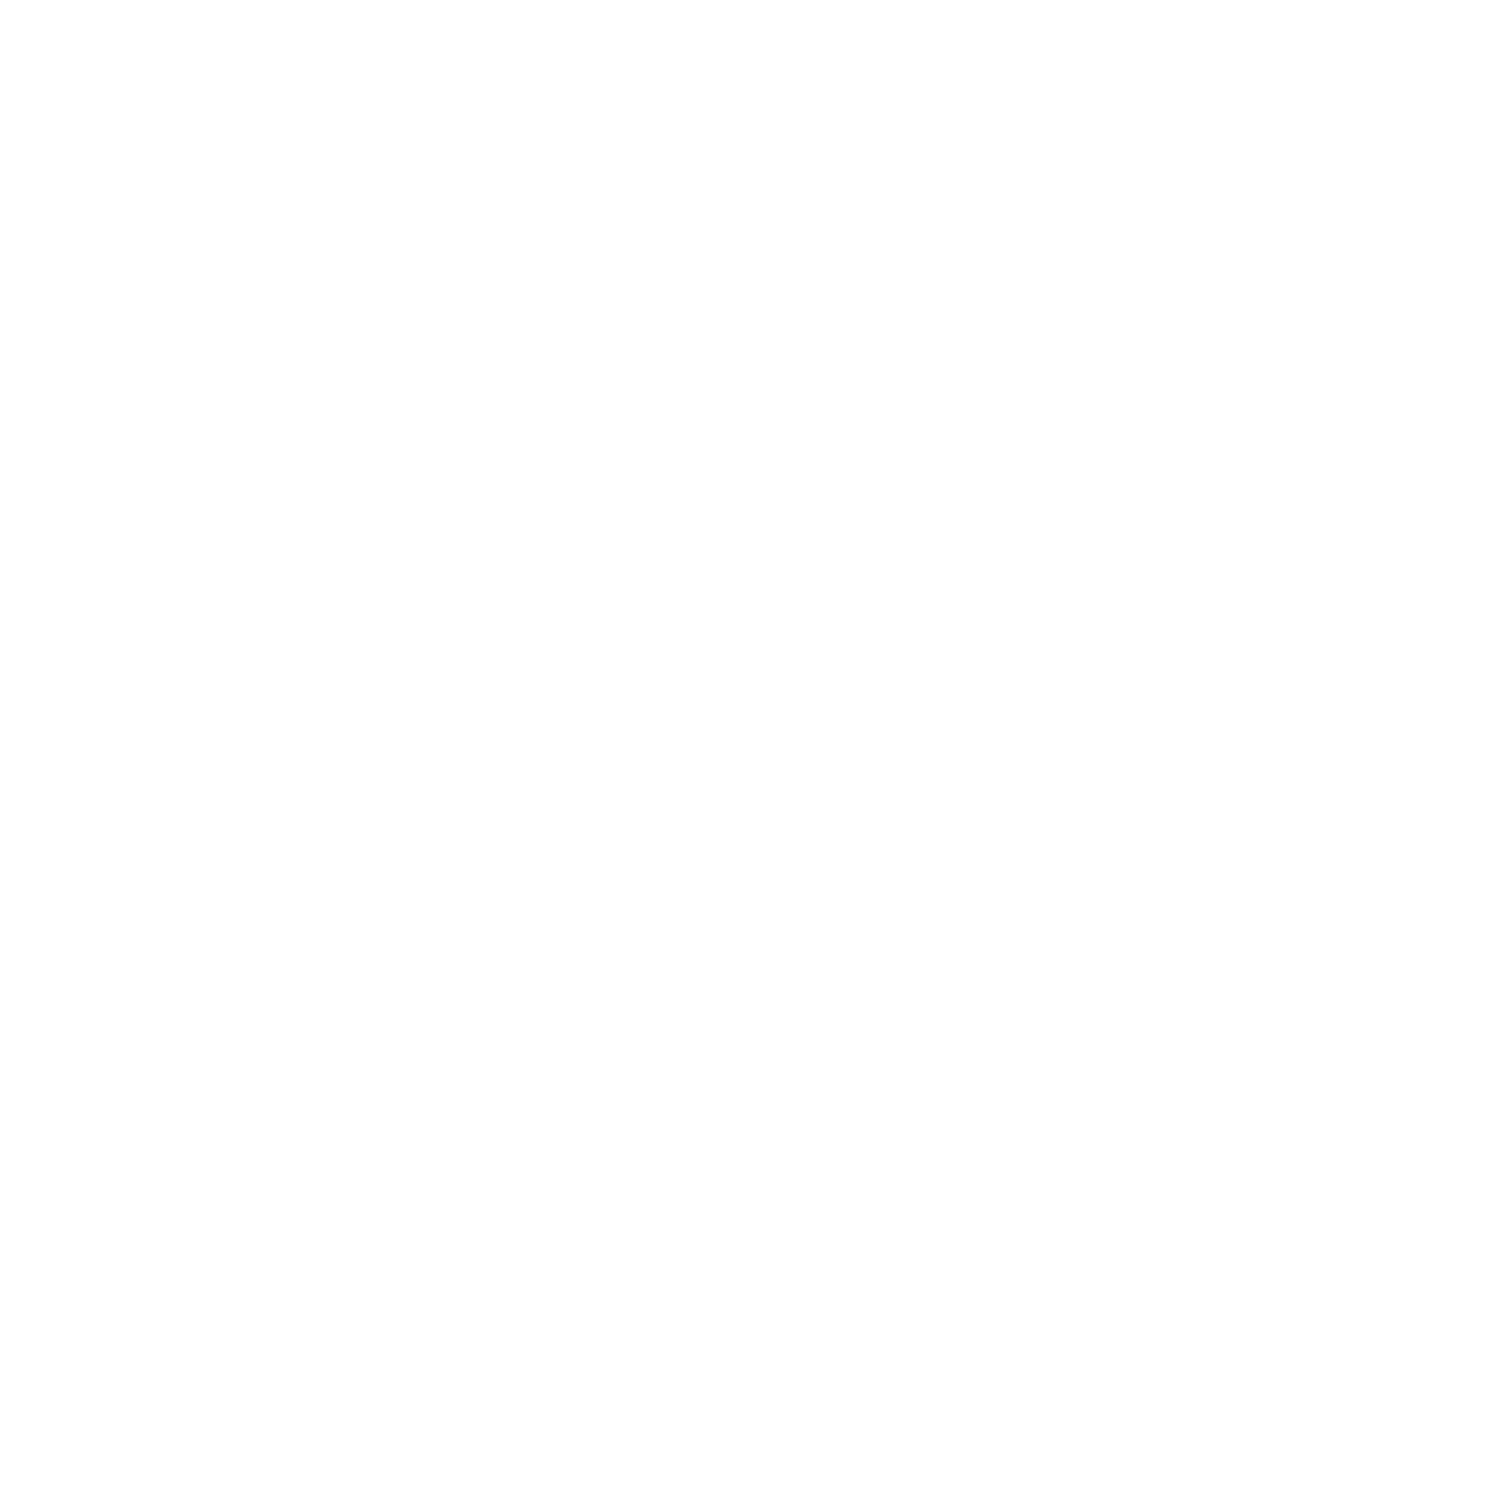 Caan Rose Estates Ltd - Slough : Letting agents in  Greater London Enfield